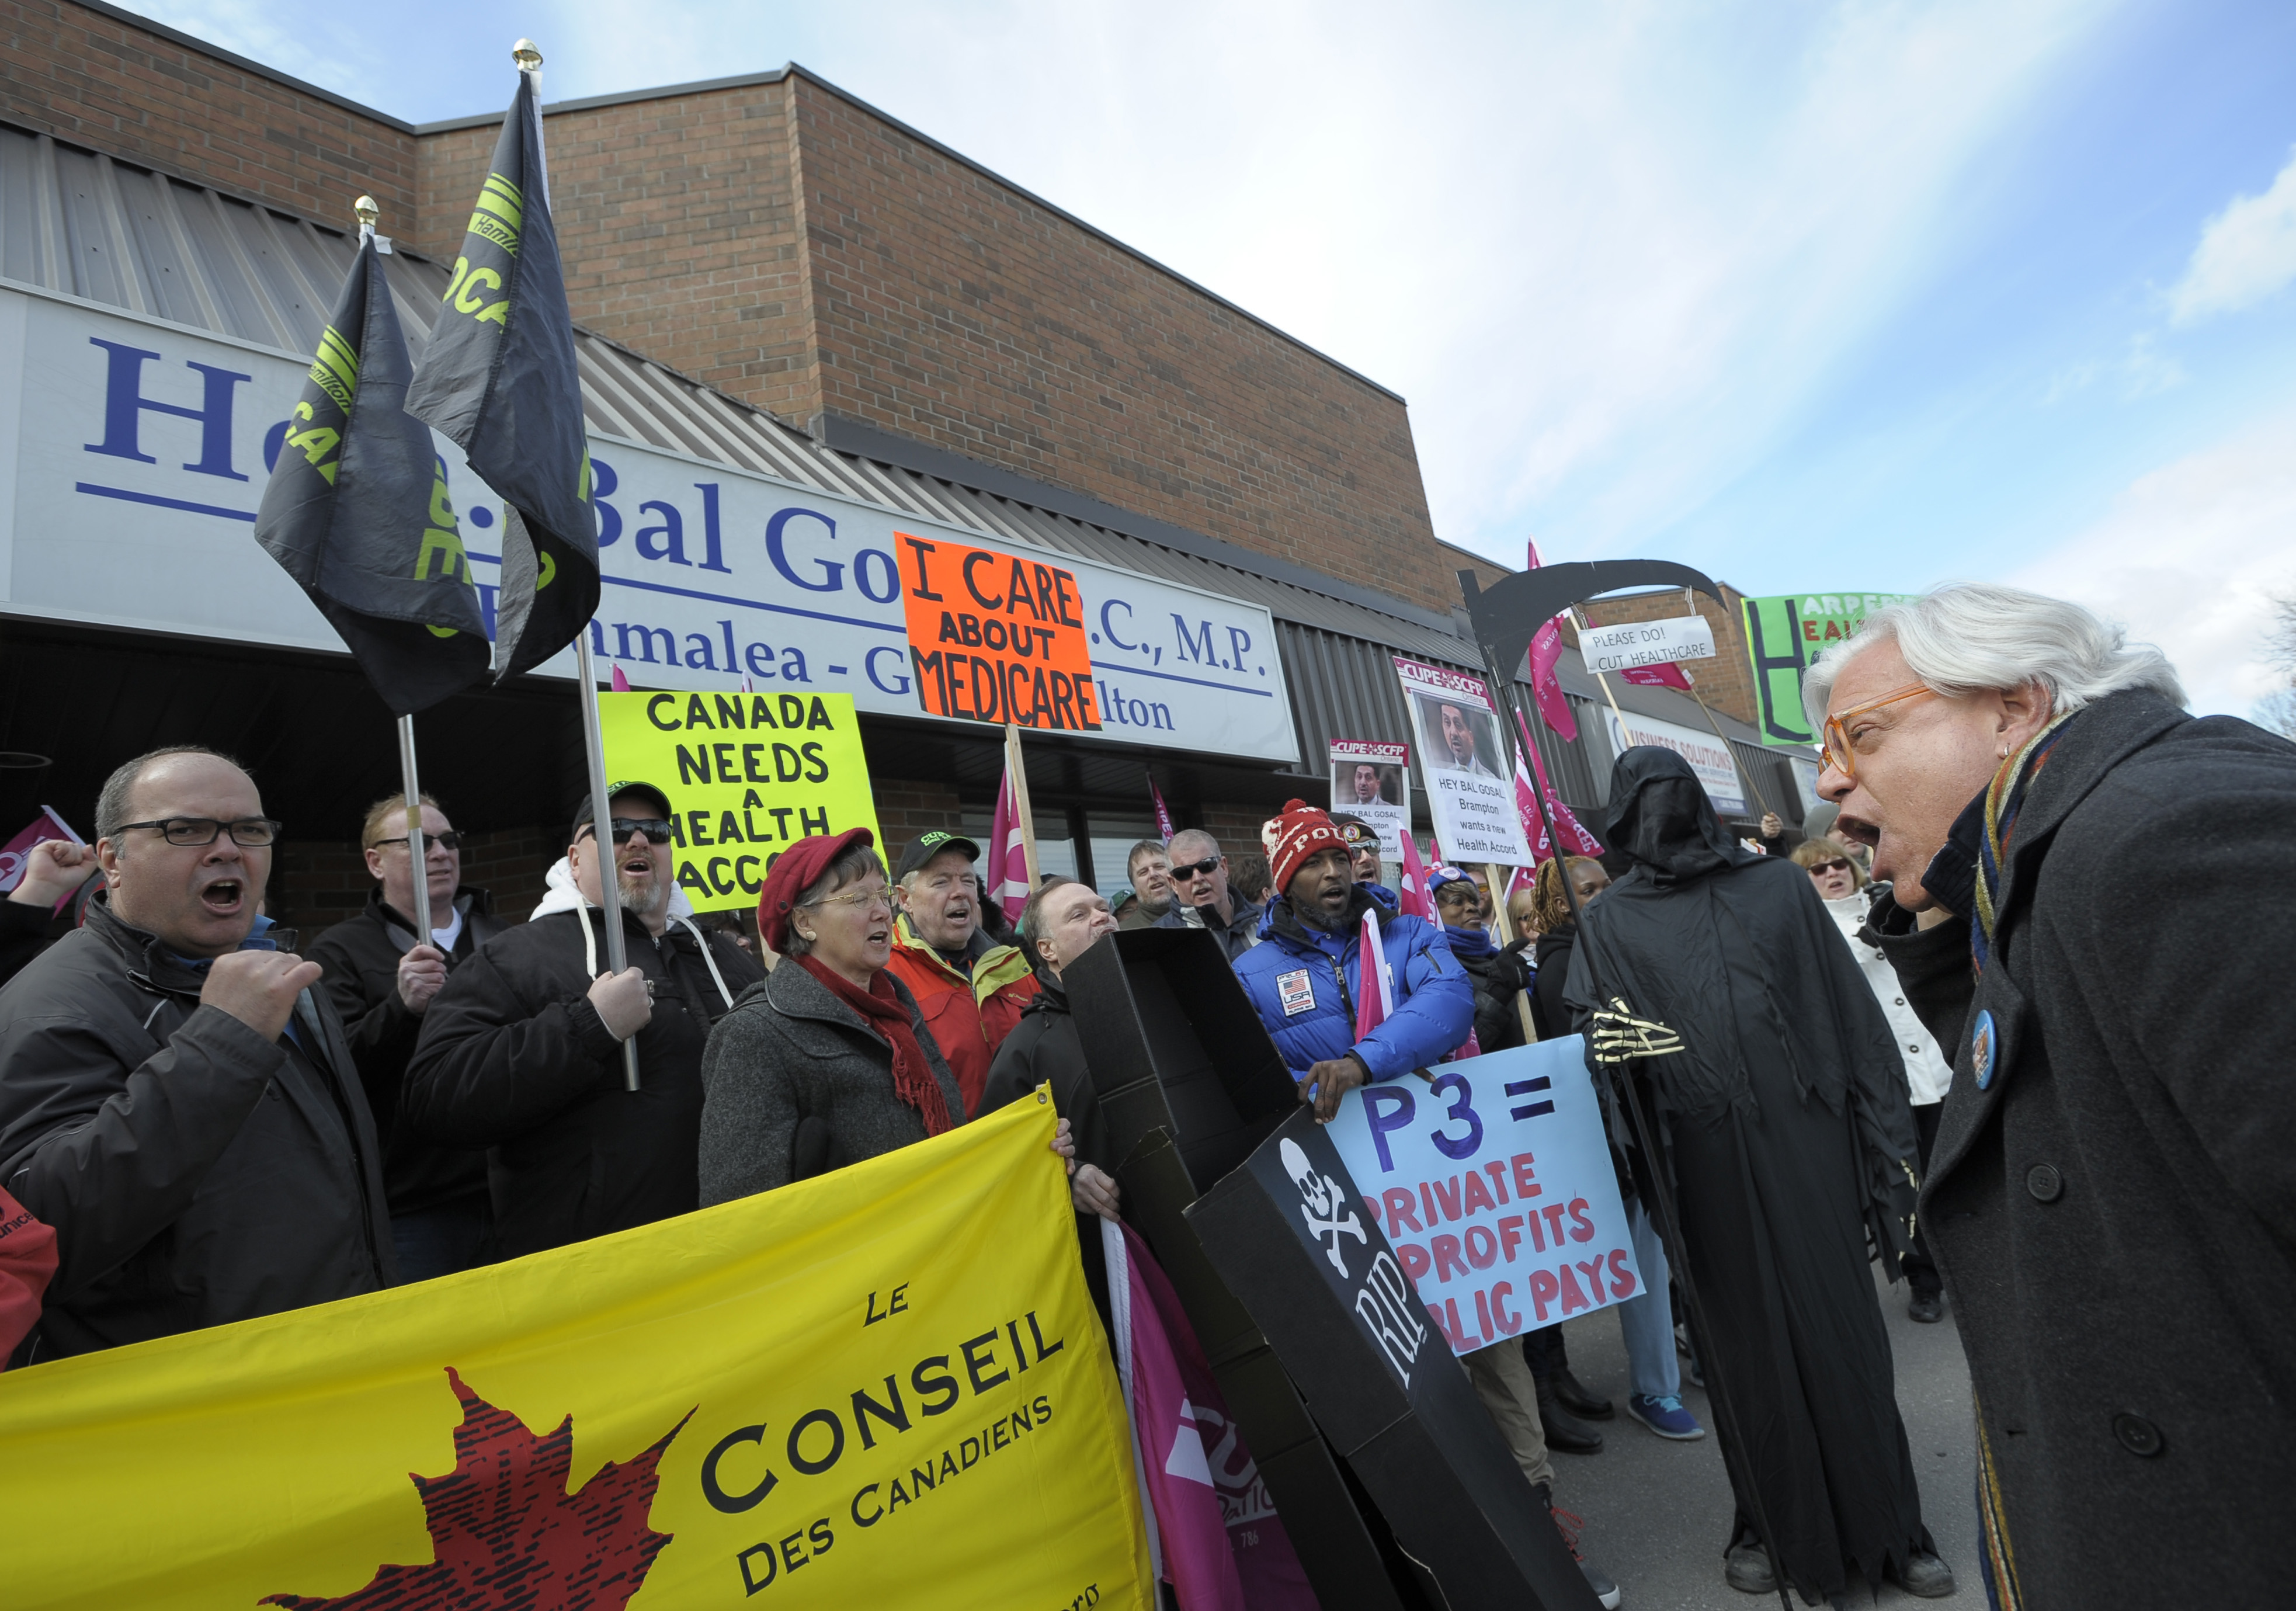 Fred Hahn and members with signs and banners at CUPE rally at Bal Gosal's Constituency office